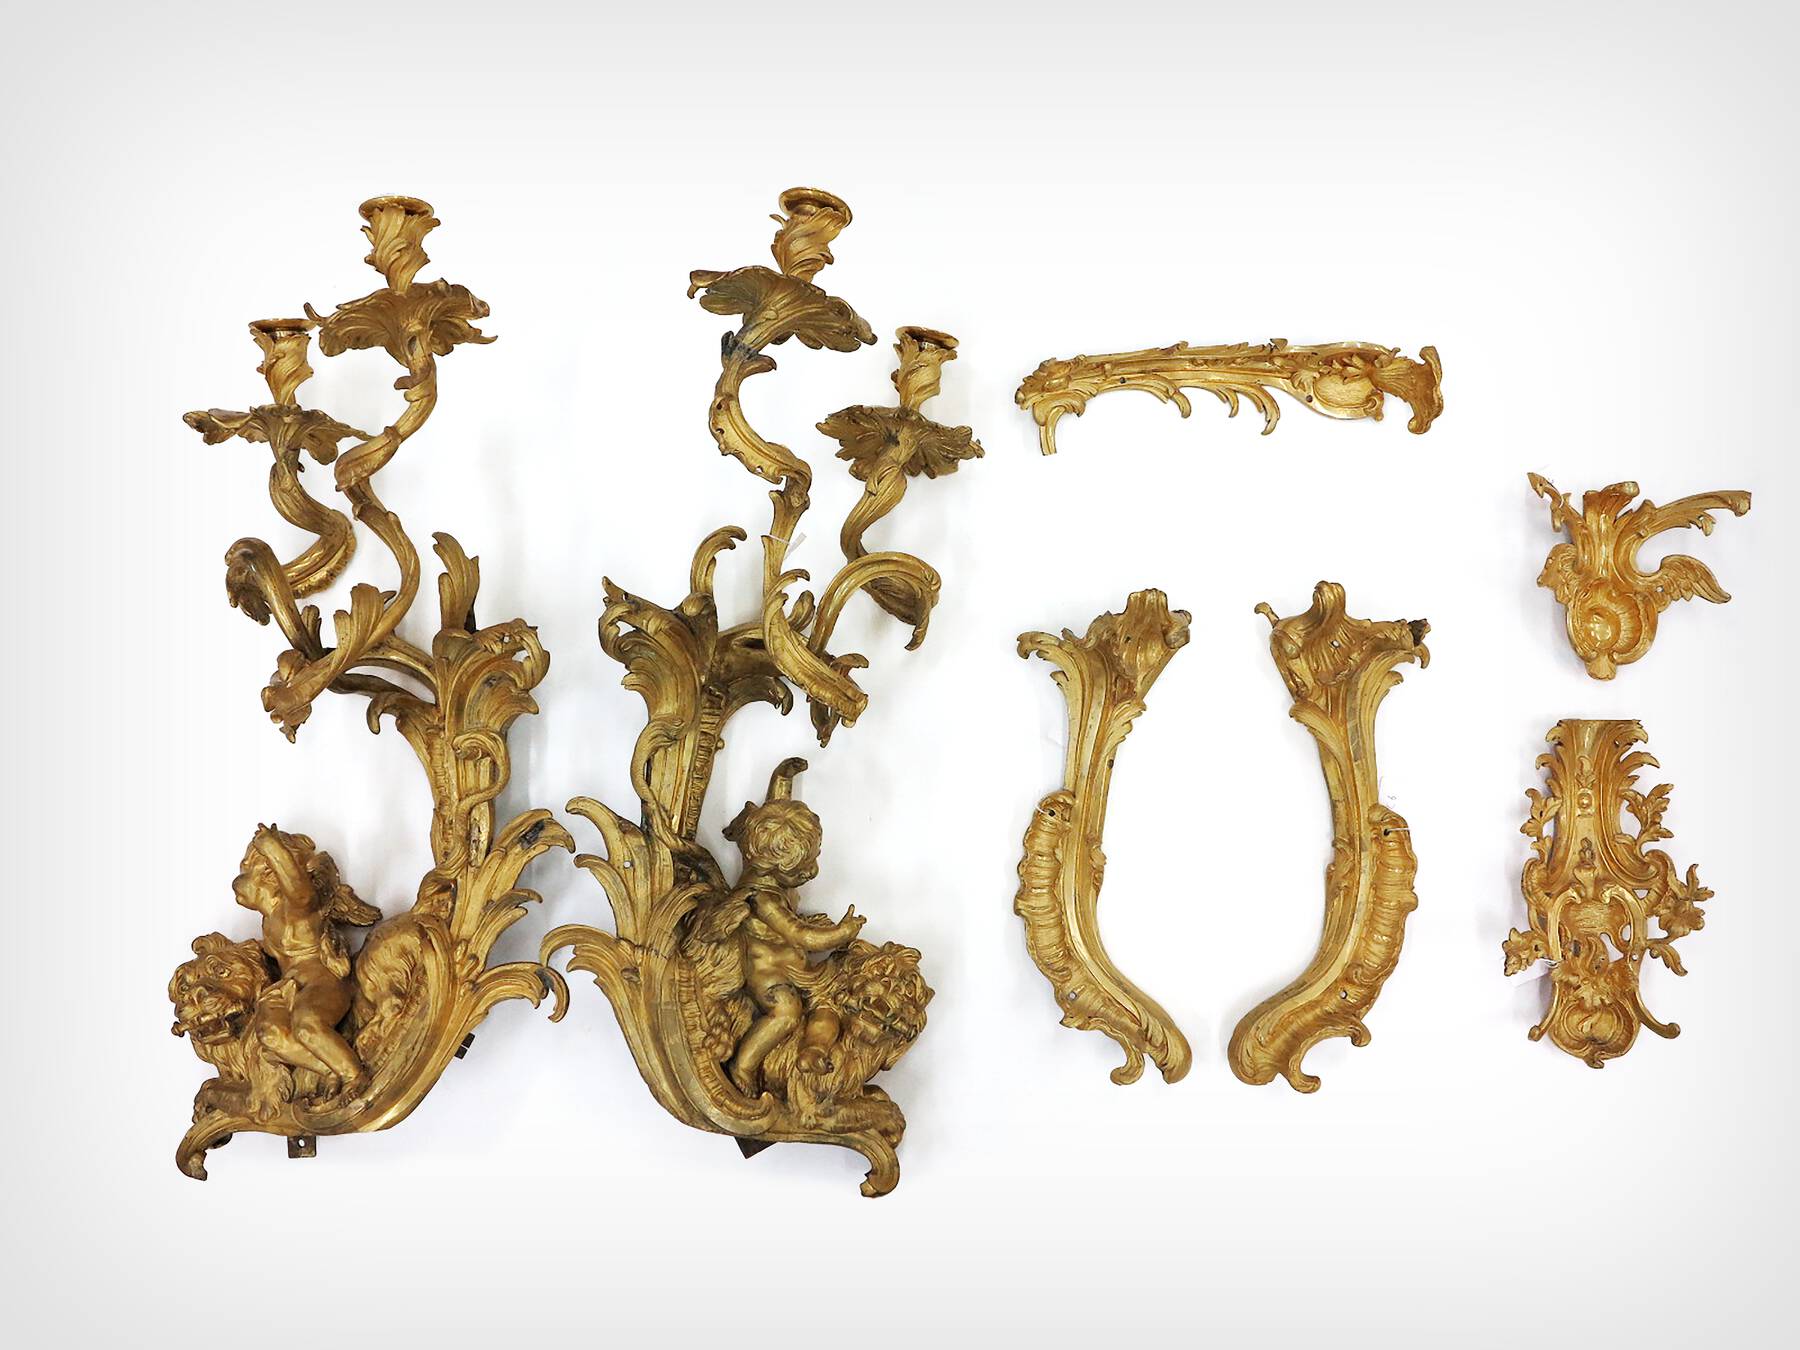 seven gilt bronze mounts with foliate designs and cherubs as seen when removed from the cabinet